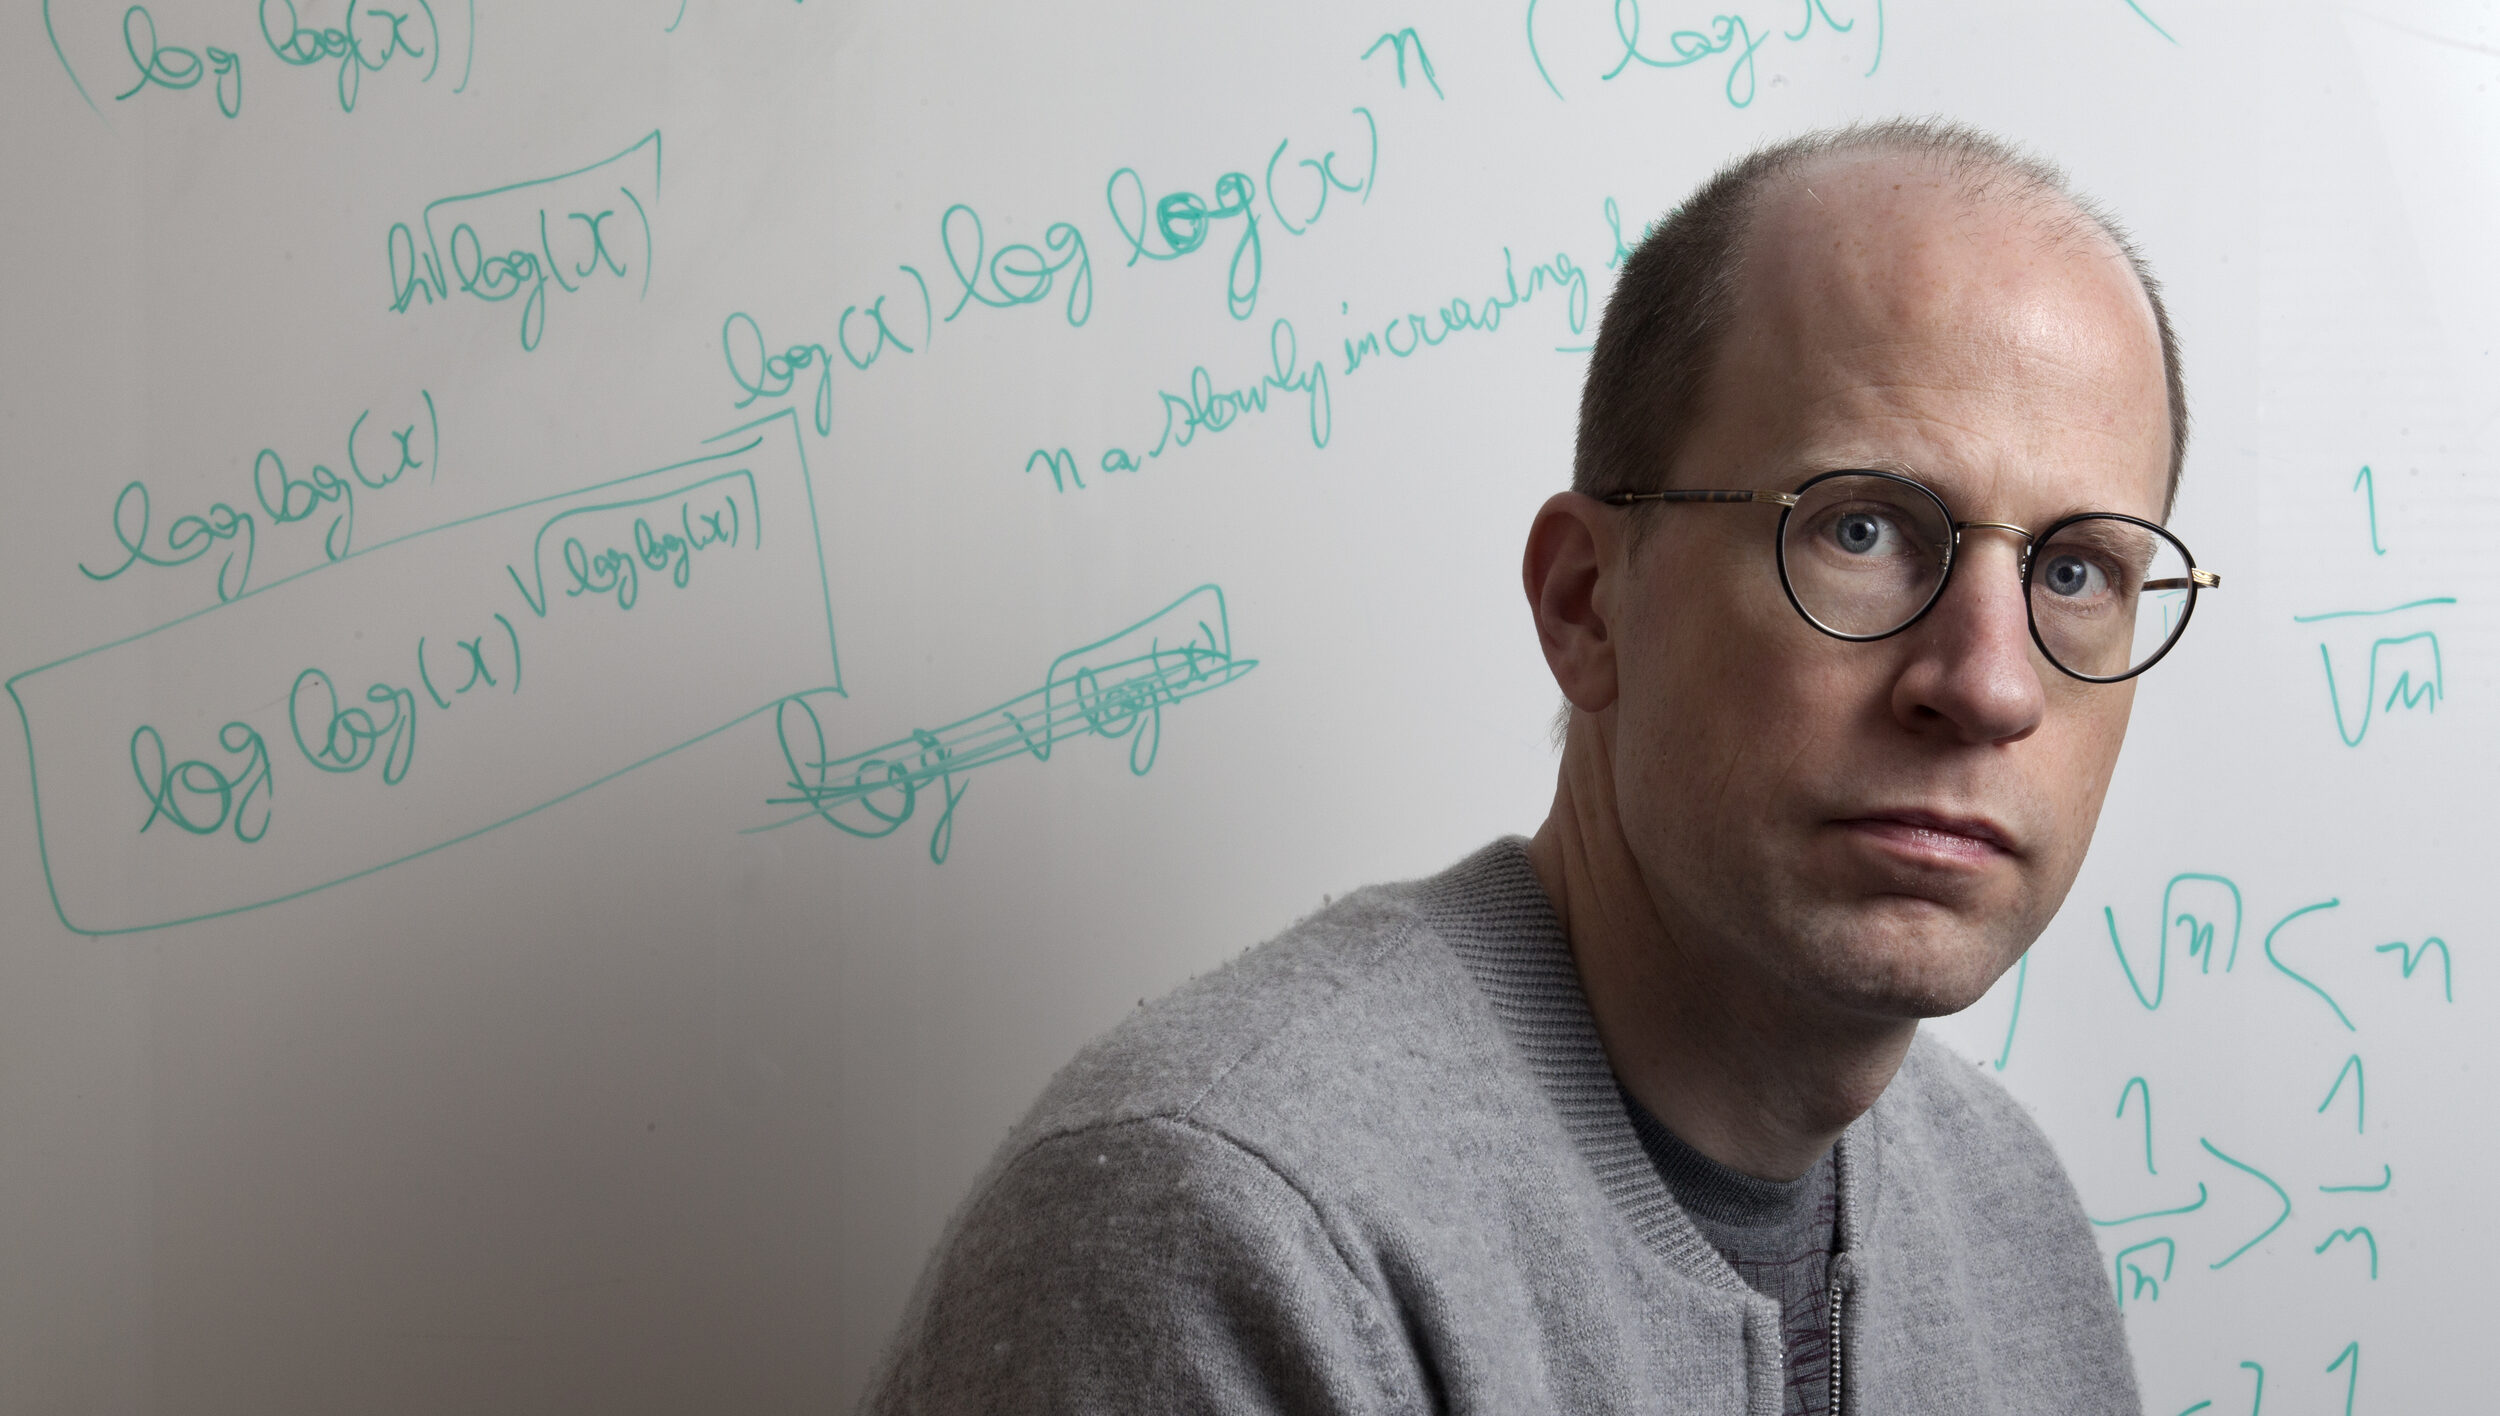 Episode 108: Dangers of A.I. with Guest Nick Bostrom, The Partially  Examined Life Philosophy Podcast